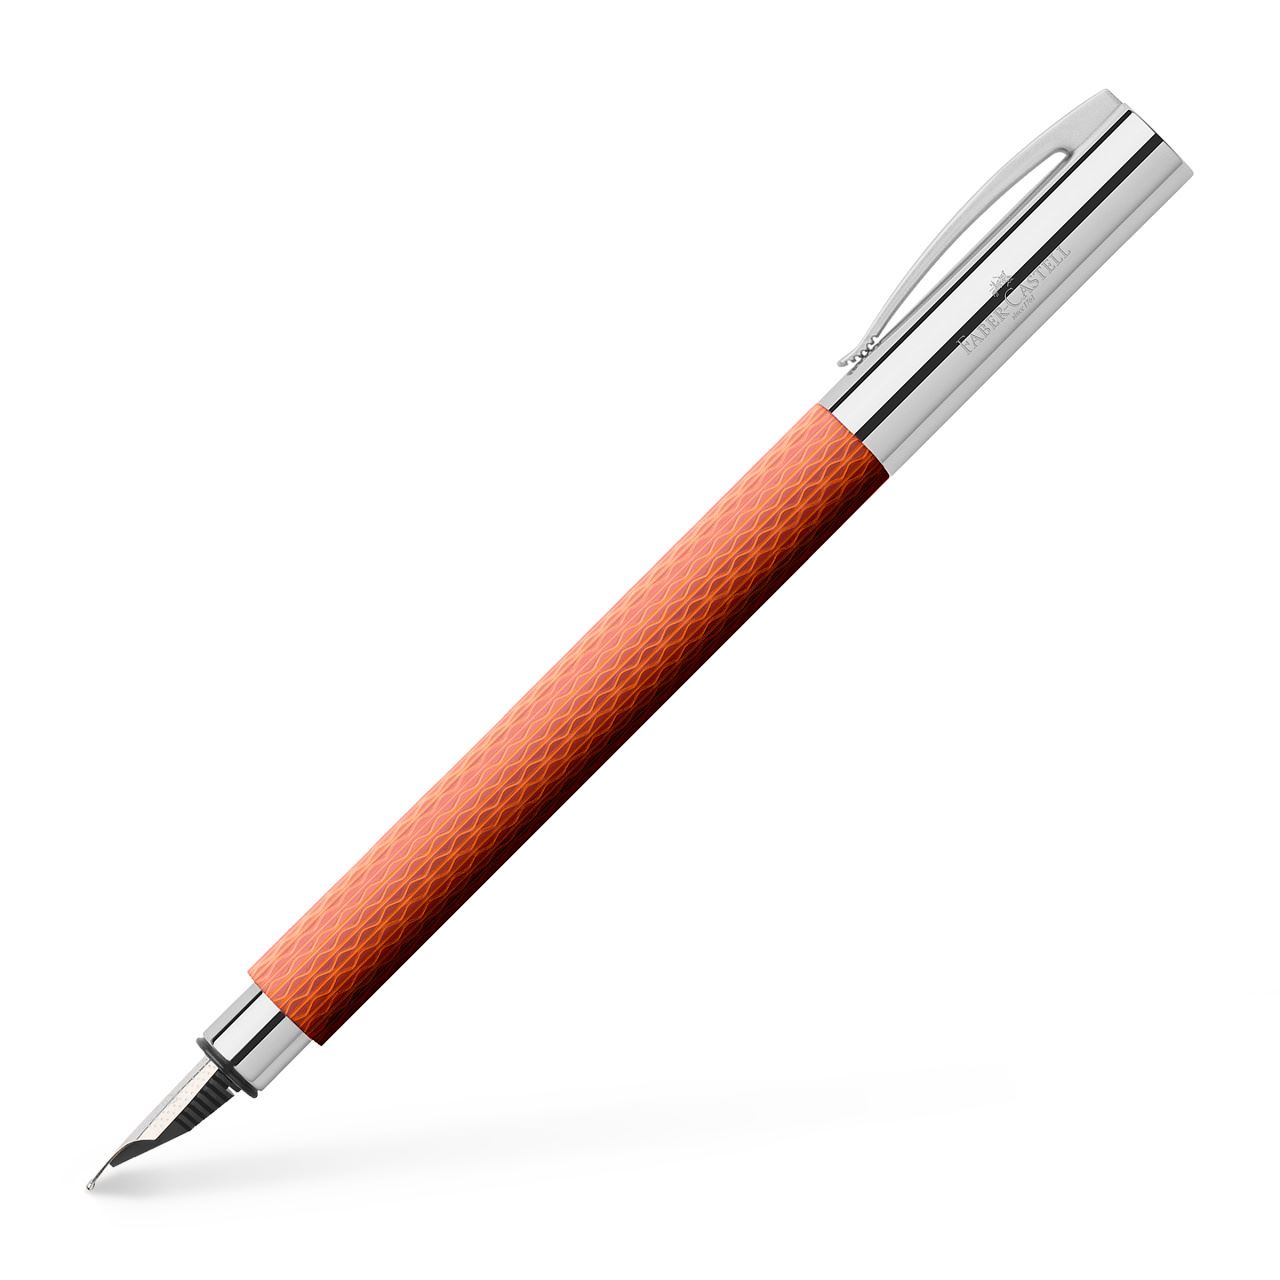 Faber-Castell - Fountain pen Ambition OpArt Autumn Leaves, EF